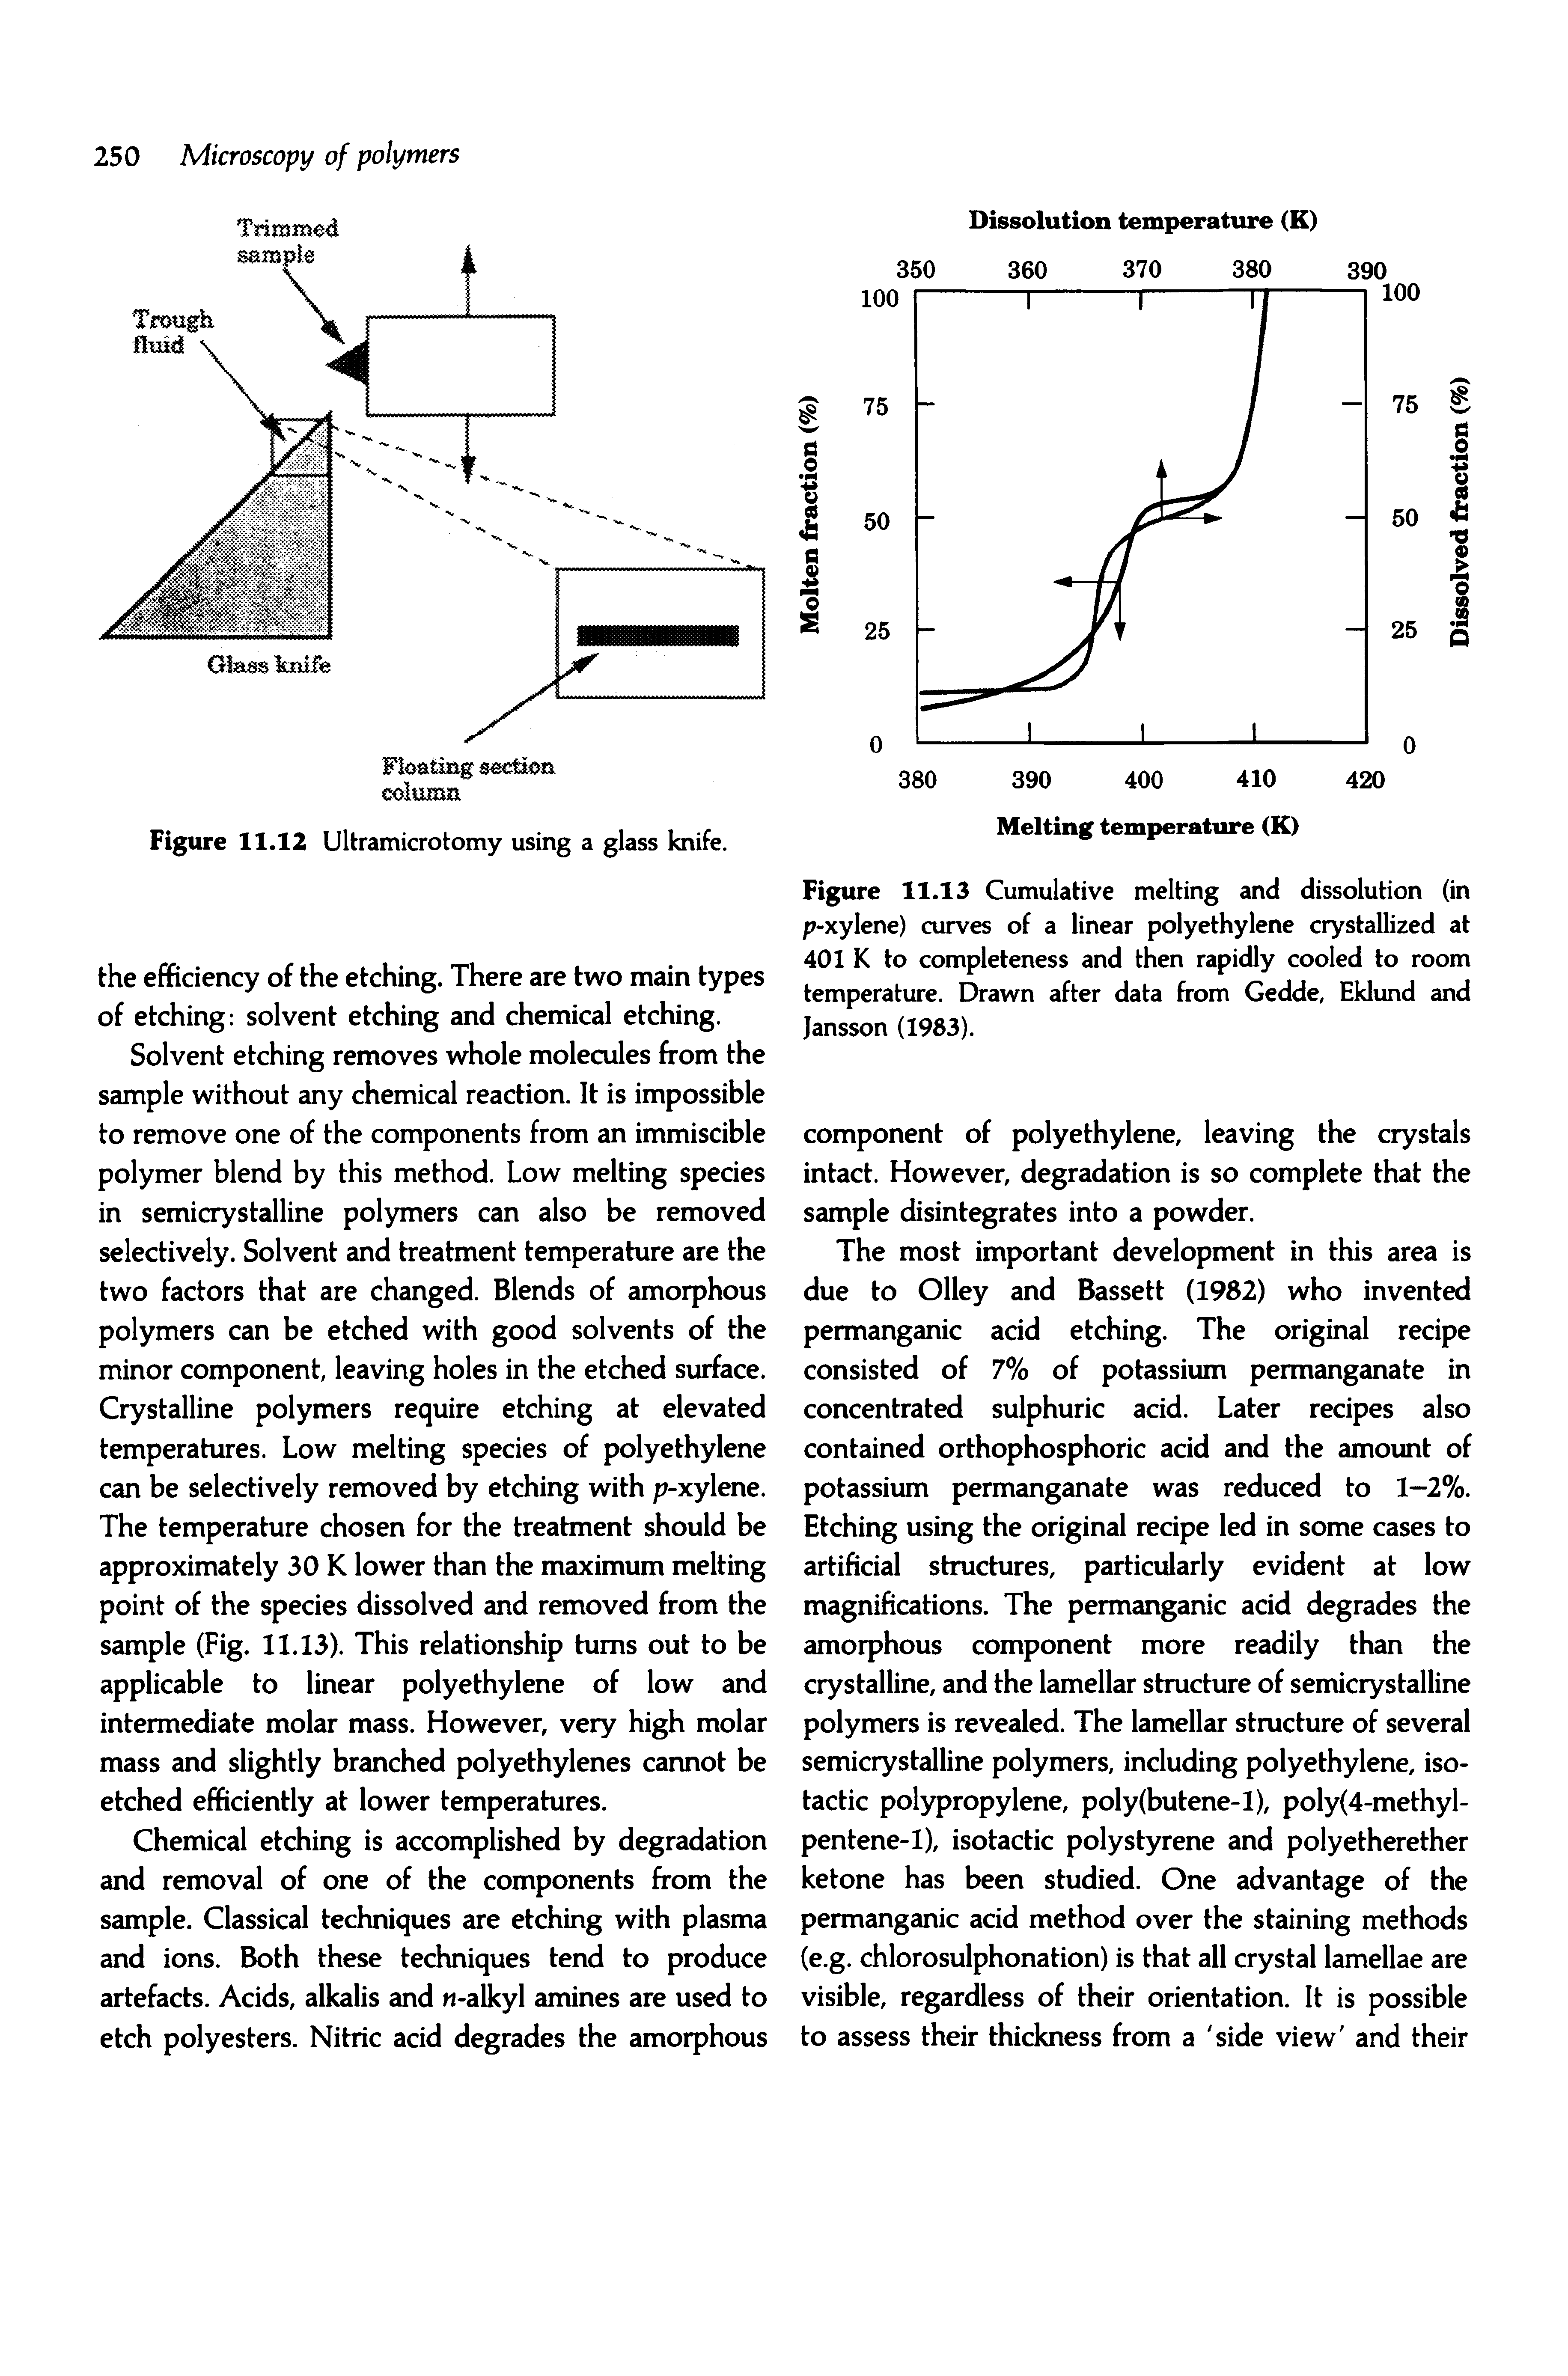 Figure 11.13 Cumulative melting and dissolution (in p-xylene) curves of a linear polyethylene crystallized at 401 K to completeness and then rapidly cooled to room temperature. Drawn after data horn Gedde, Eklund and Jansson (1983).